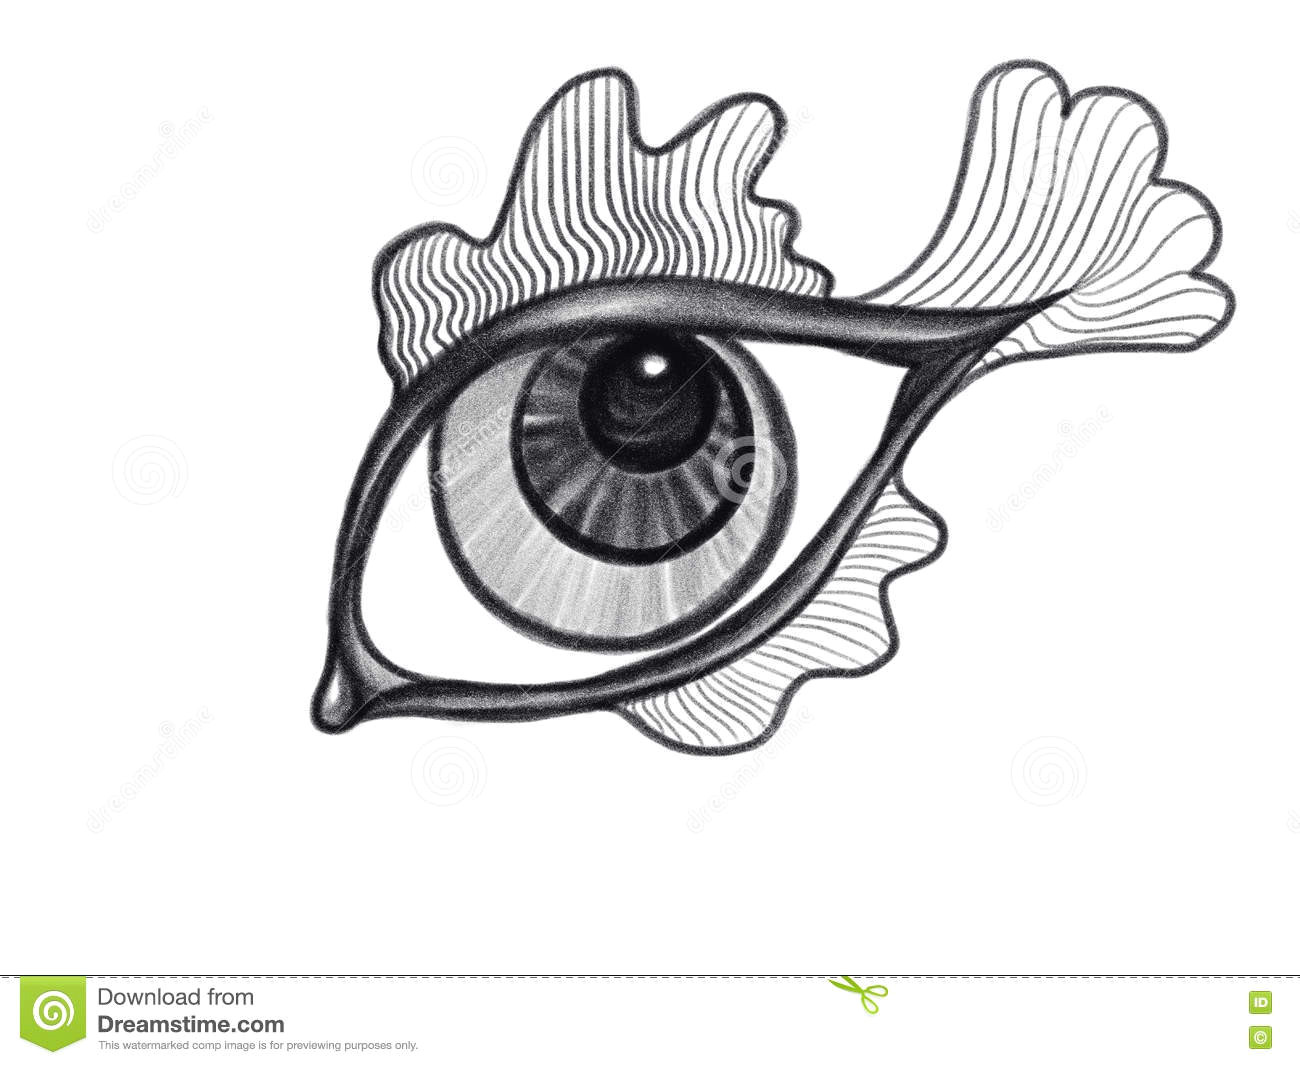 Eyes Drawing Black and White isolated Black and White Eye as A Fish Drawn by Pencil Stock